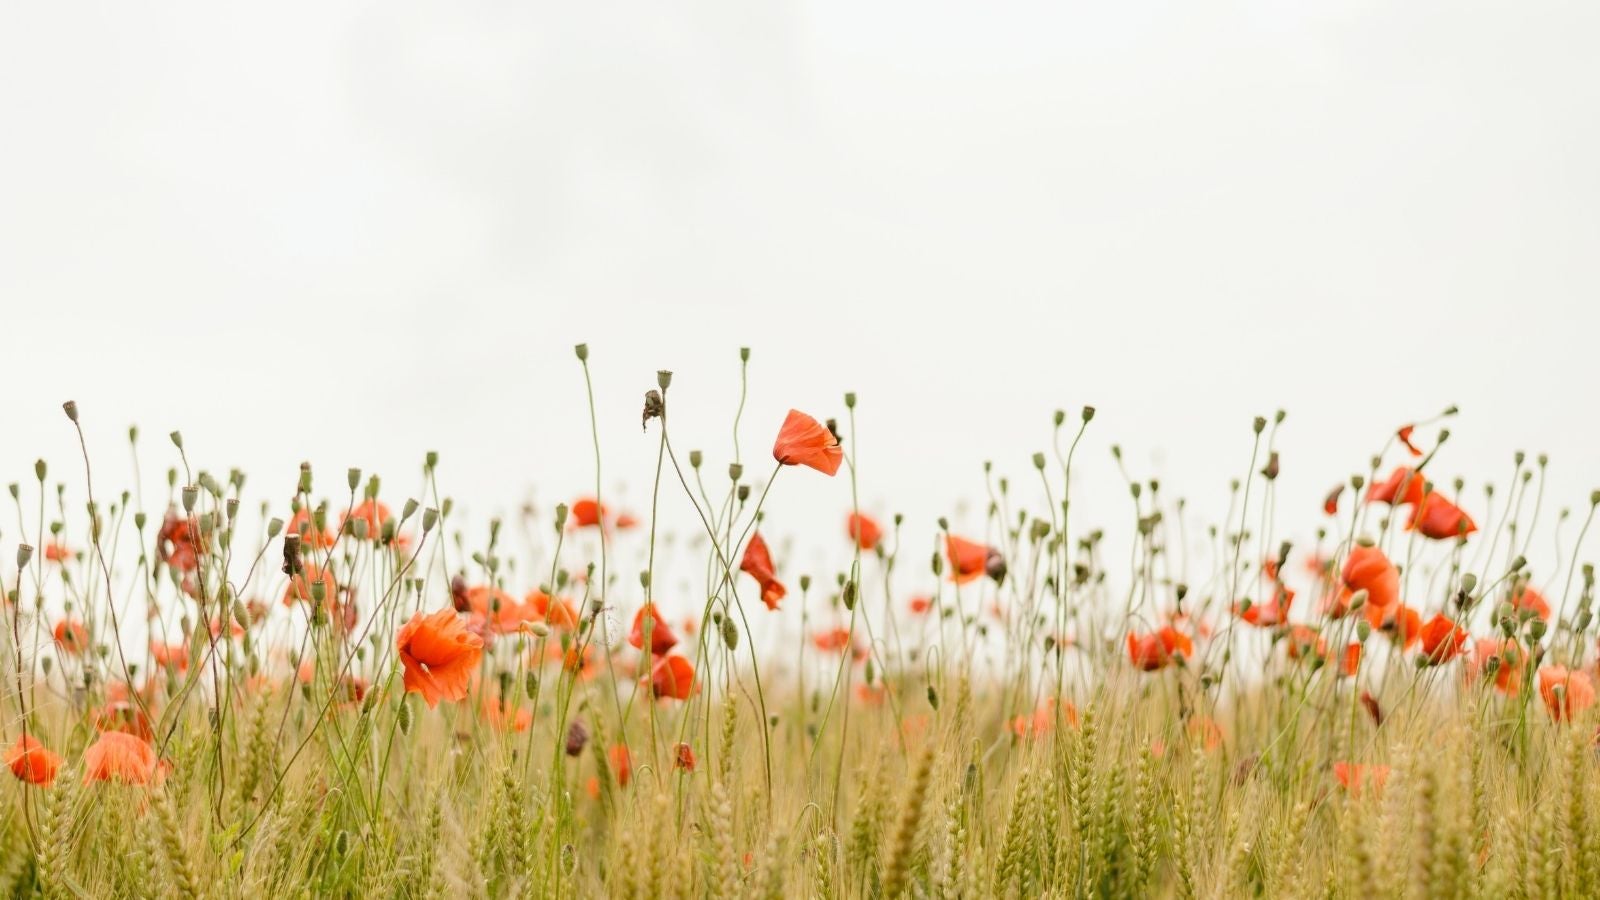 Field of poppies and tall grass